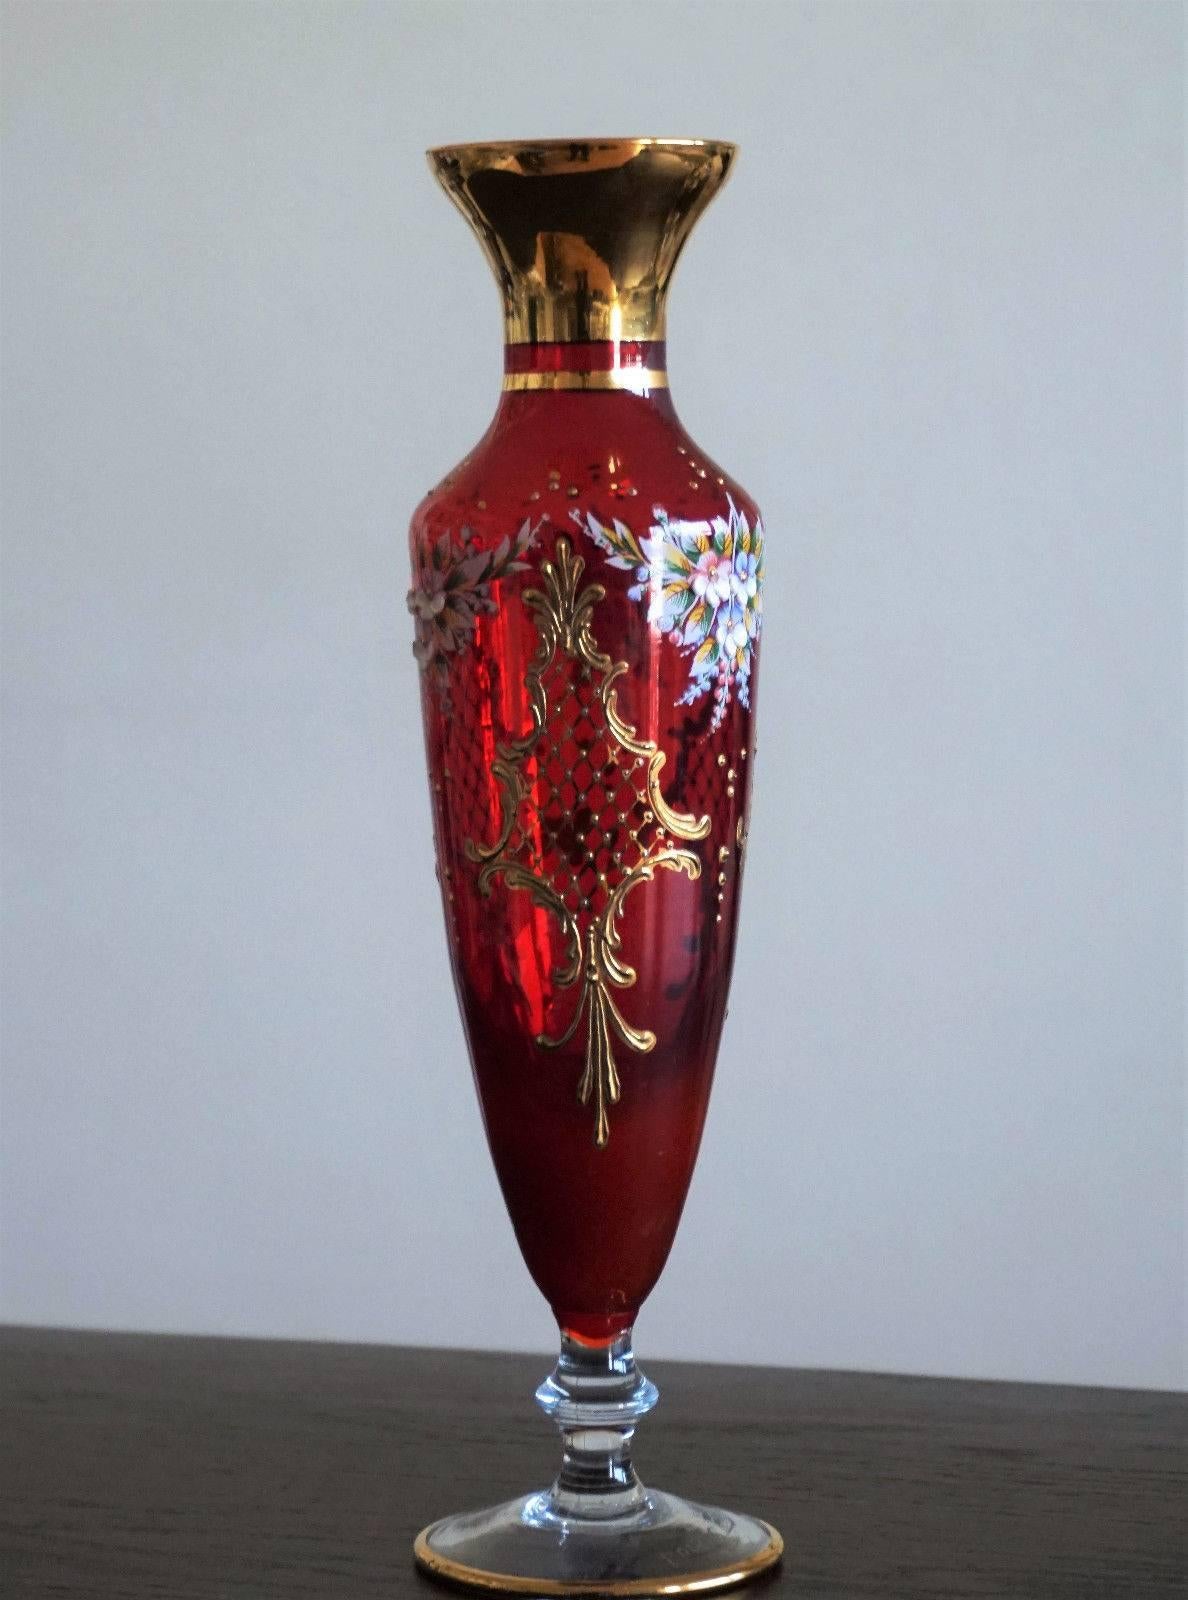 Elegant vintage Bohemian robin red art glass vase with 22-Karat gold gilded enameled hand-painted decor and floral motifs.

Very good condition, no chips or cracks

Measures: Height 10.65 in (27 cm)
Diameter 3.15 in (8 cm)

Marked "Luis